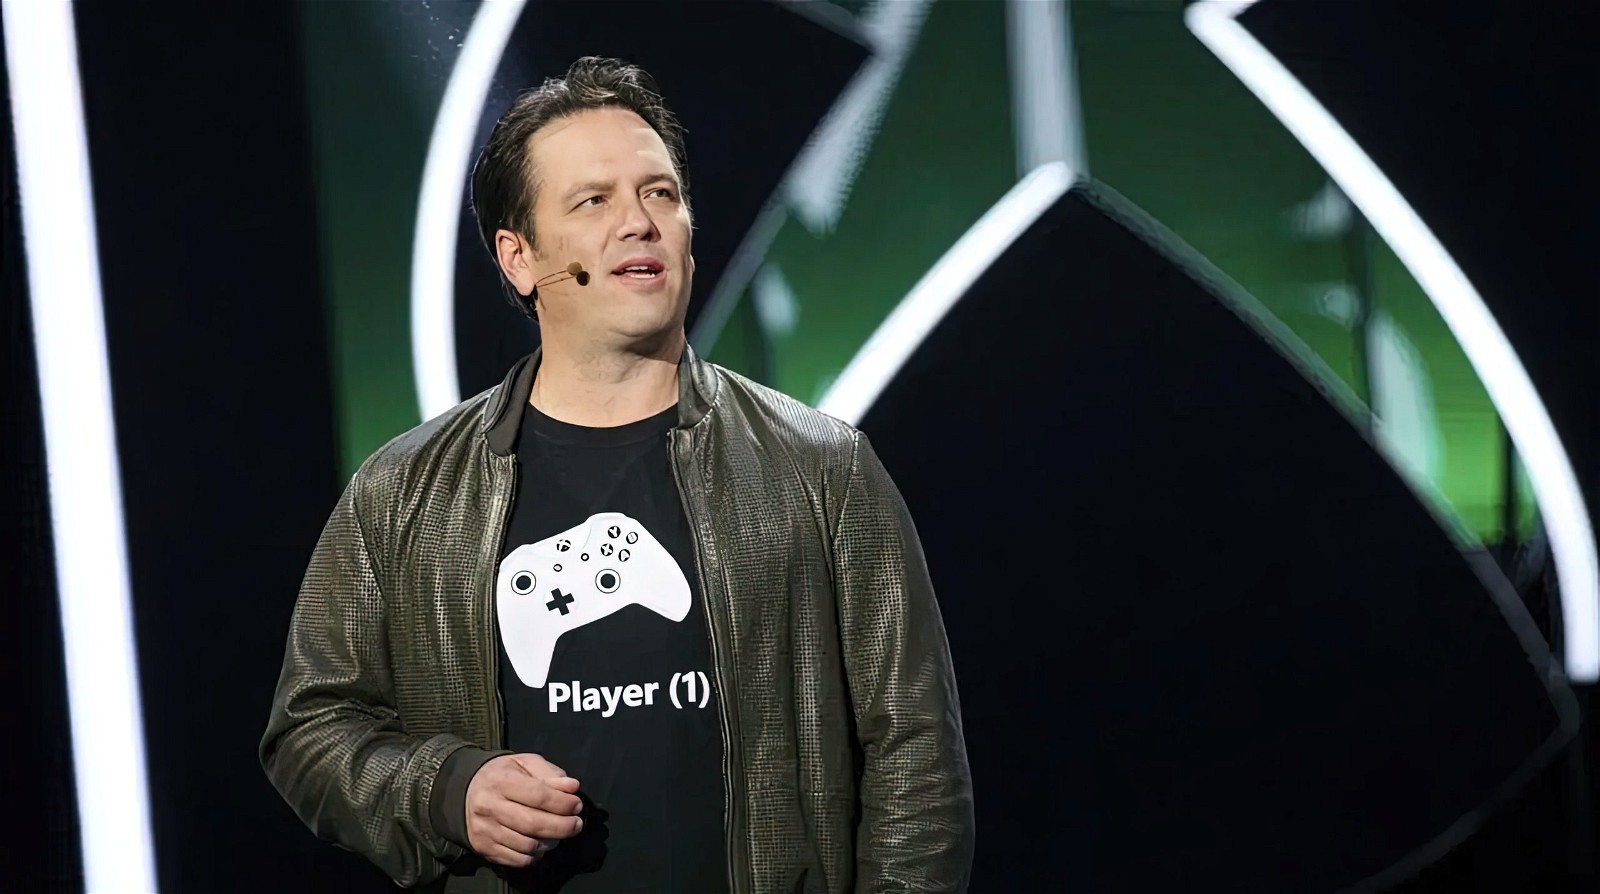 Xbox's mission is to produce quality games, yet it still shut down the studio that made its best game in recent years.